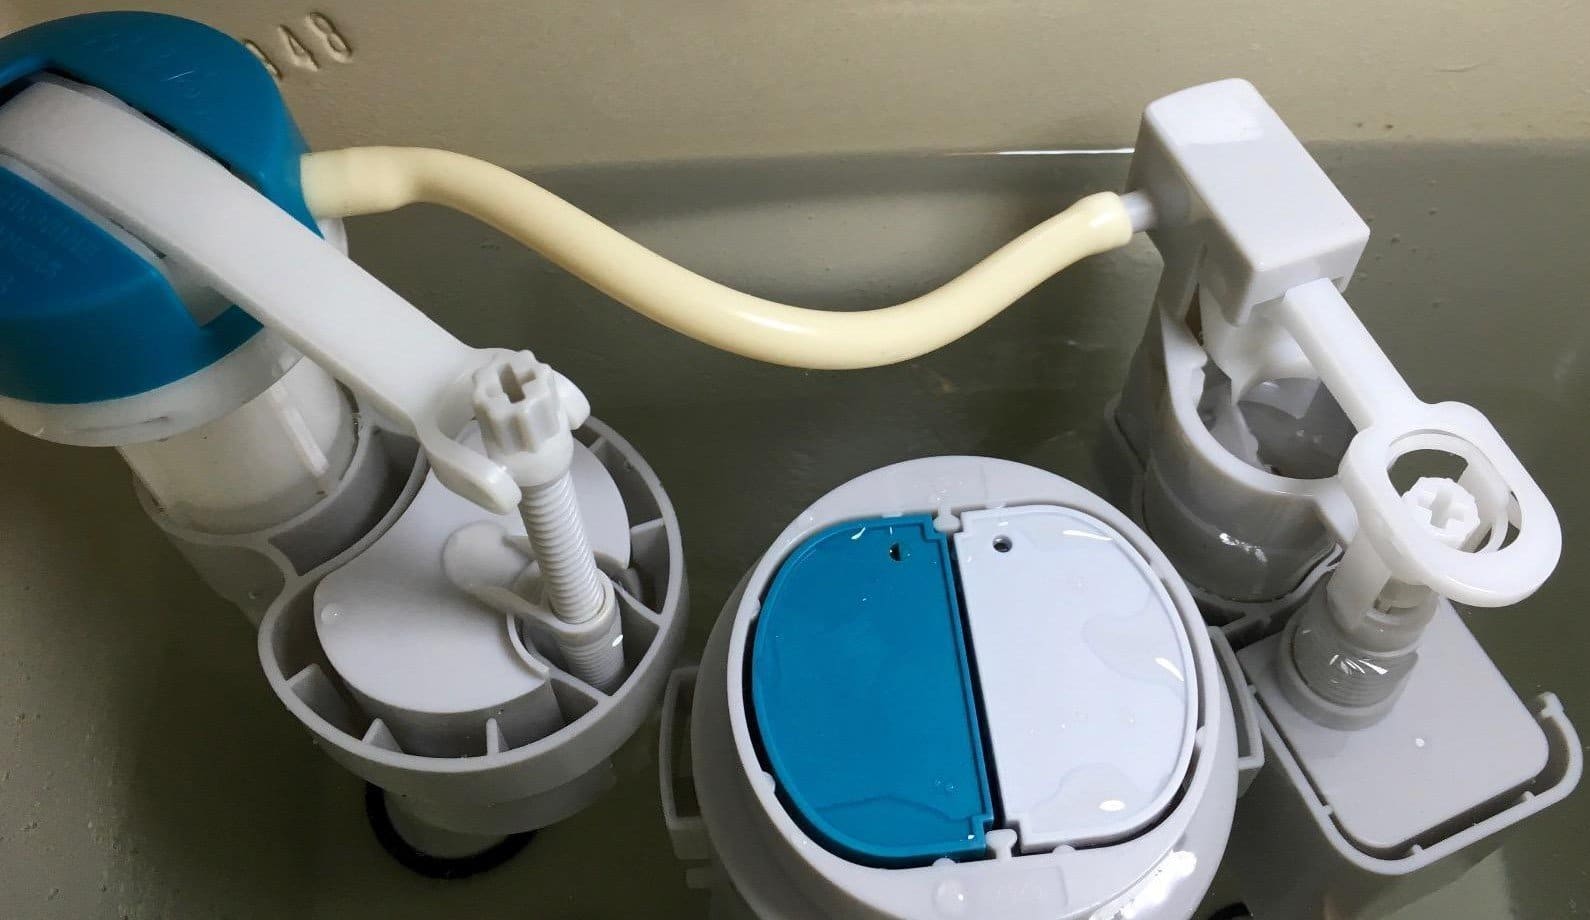 how-to-make-a-toilet-flush-better-i-hate-flushing-twice-toilet-haven